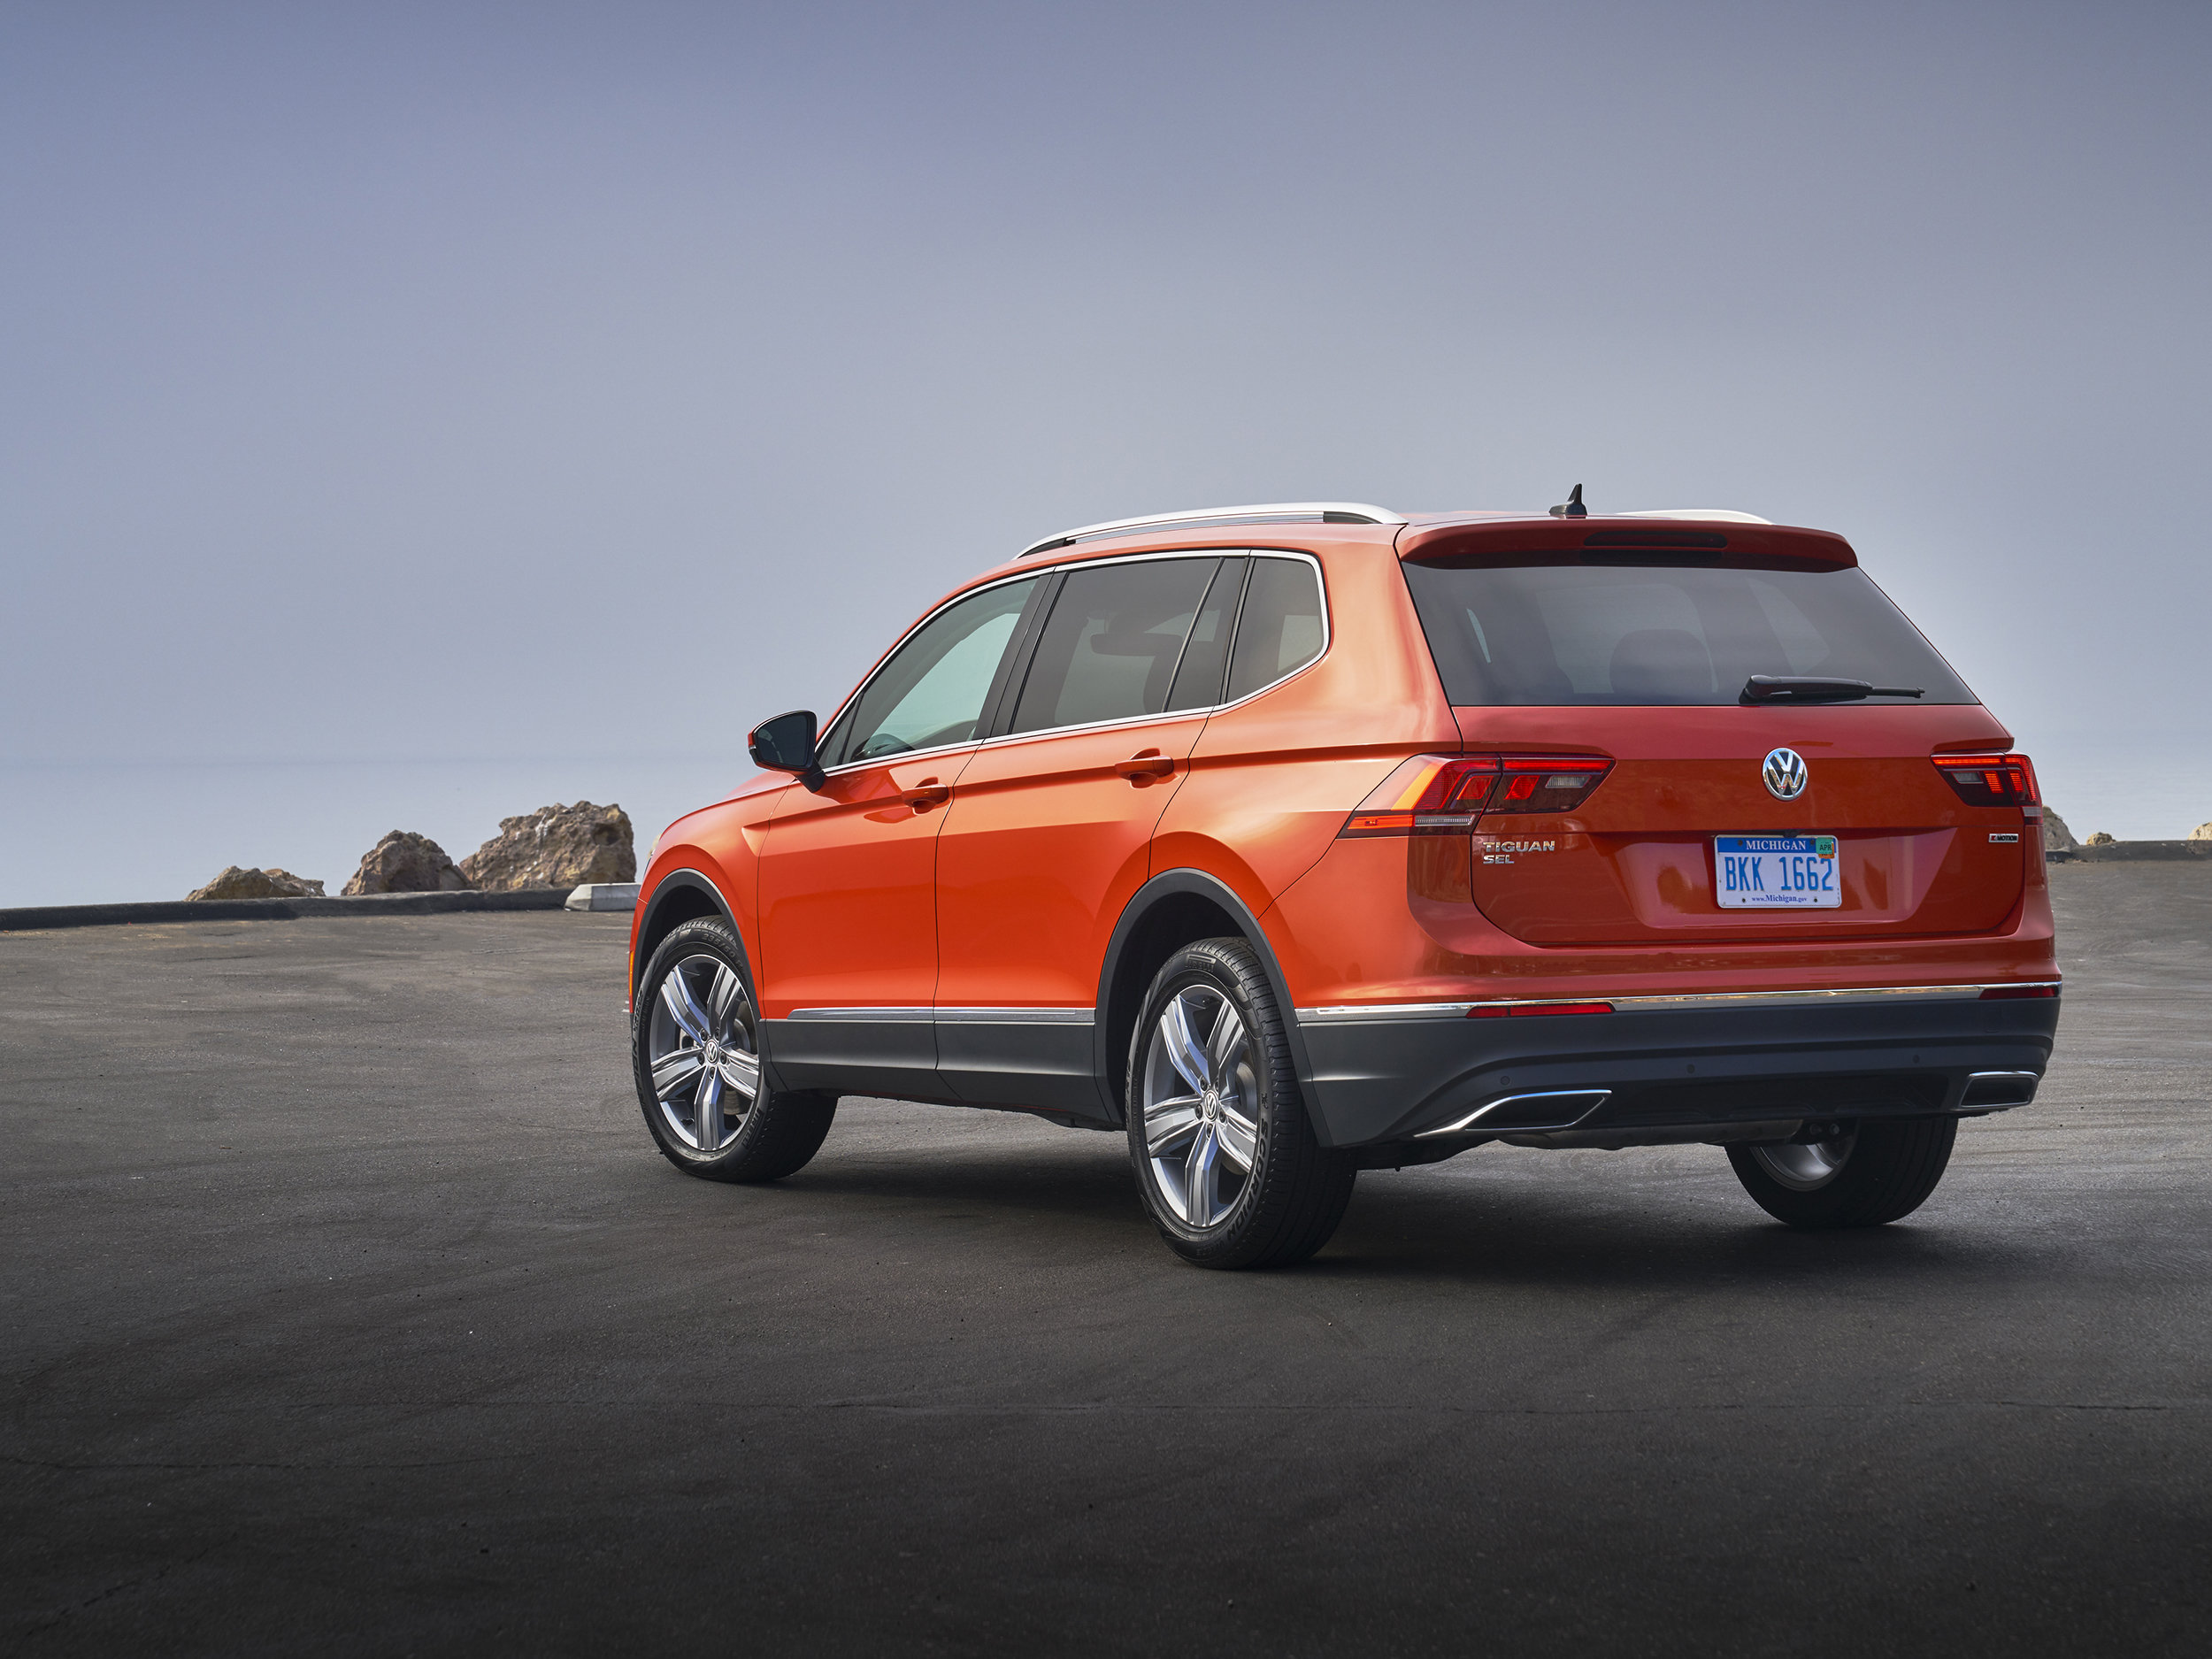 Tiguan Passes Six Million In Sales Becomes Best Selling Volkswagen Automotivemap